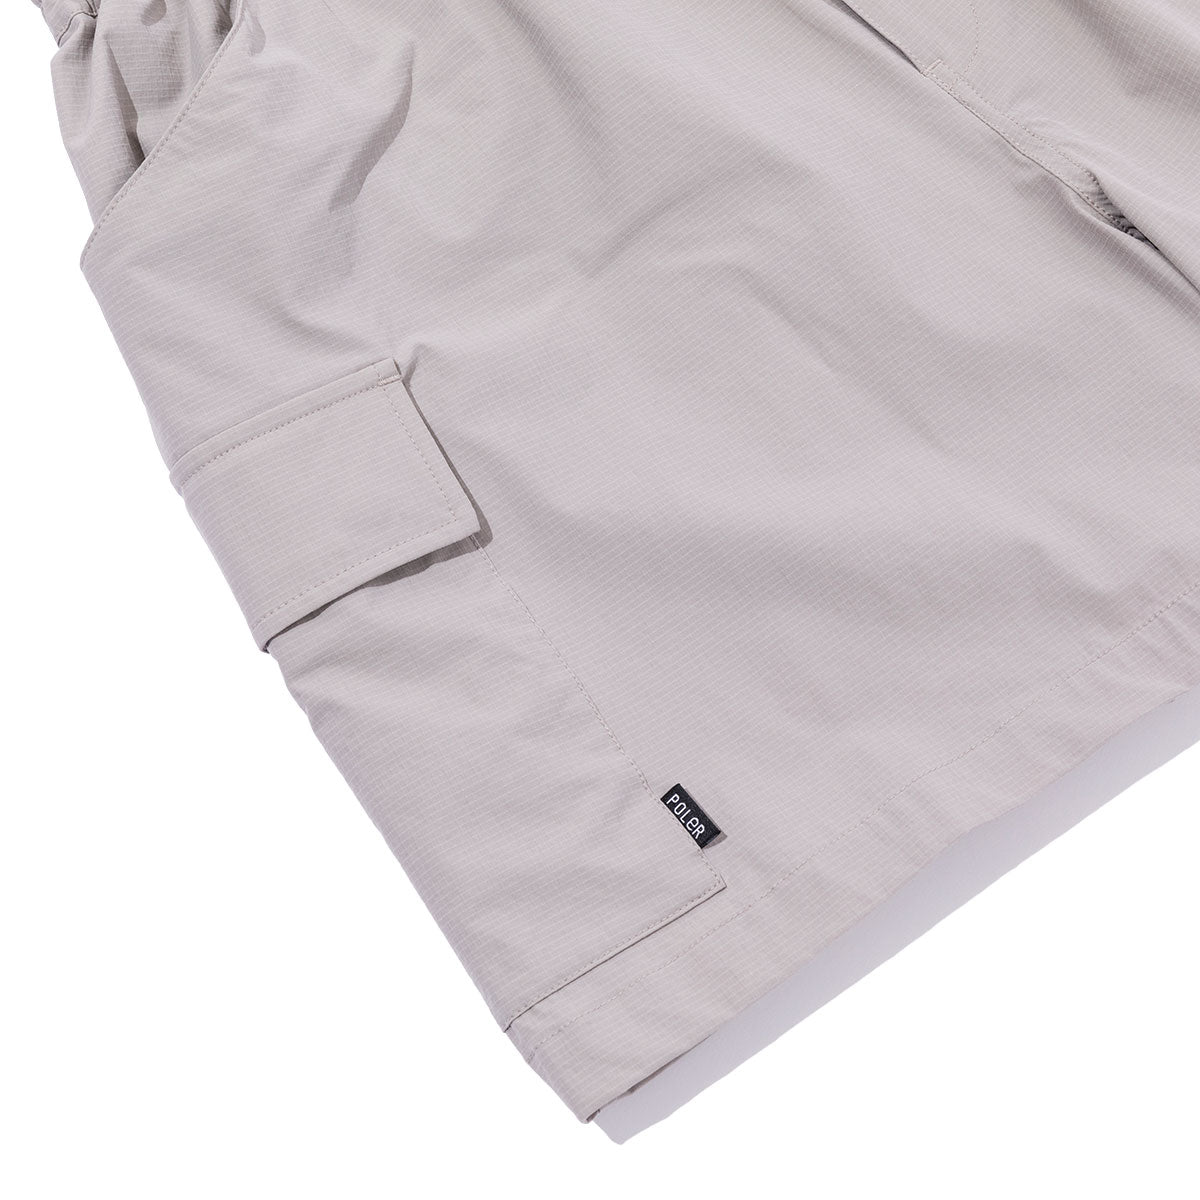 STRETCH RIP RELAX CARGO SHORTS